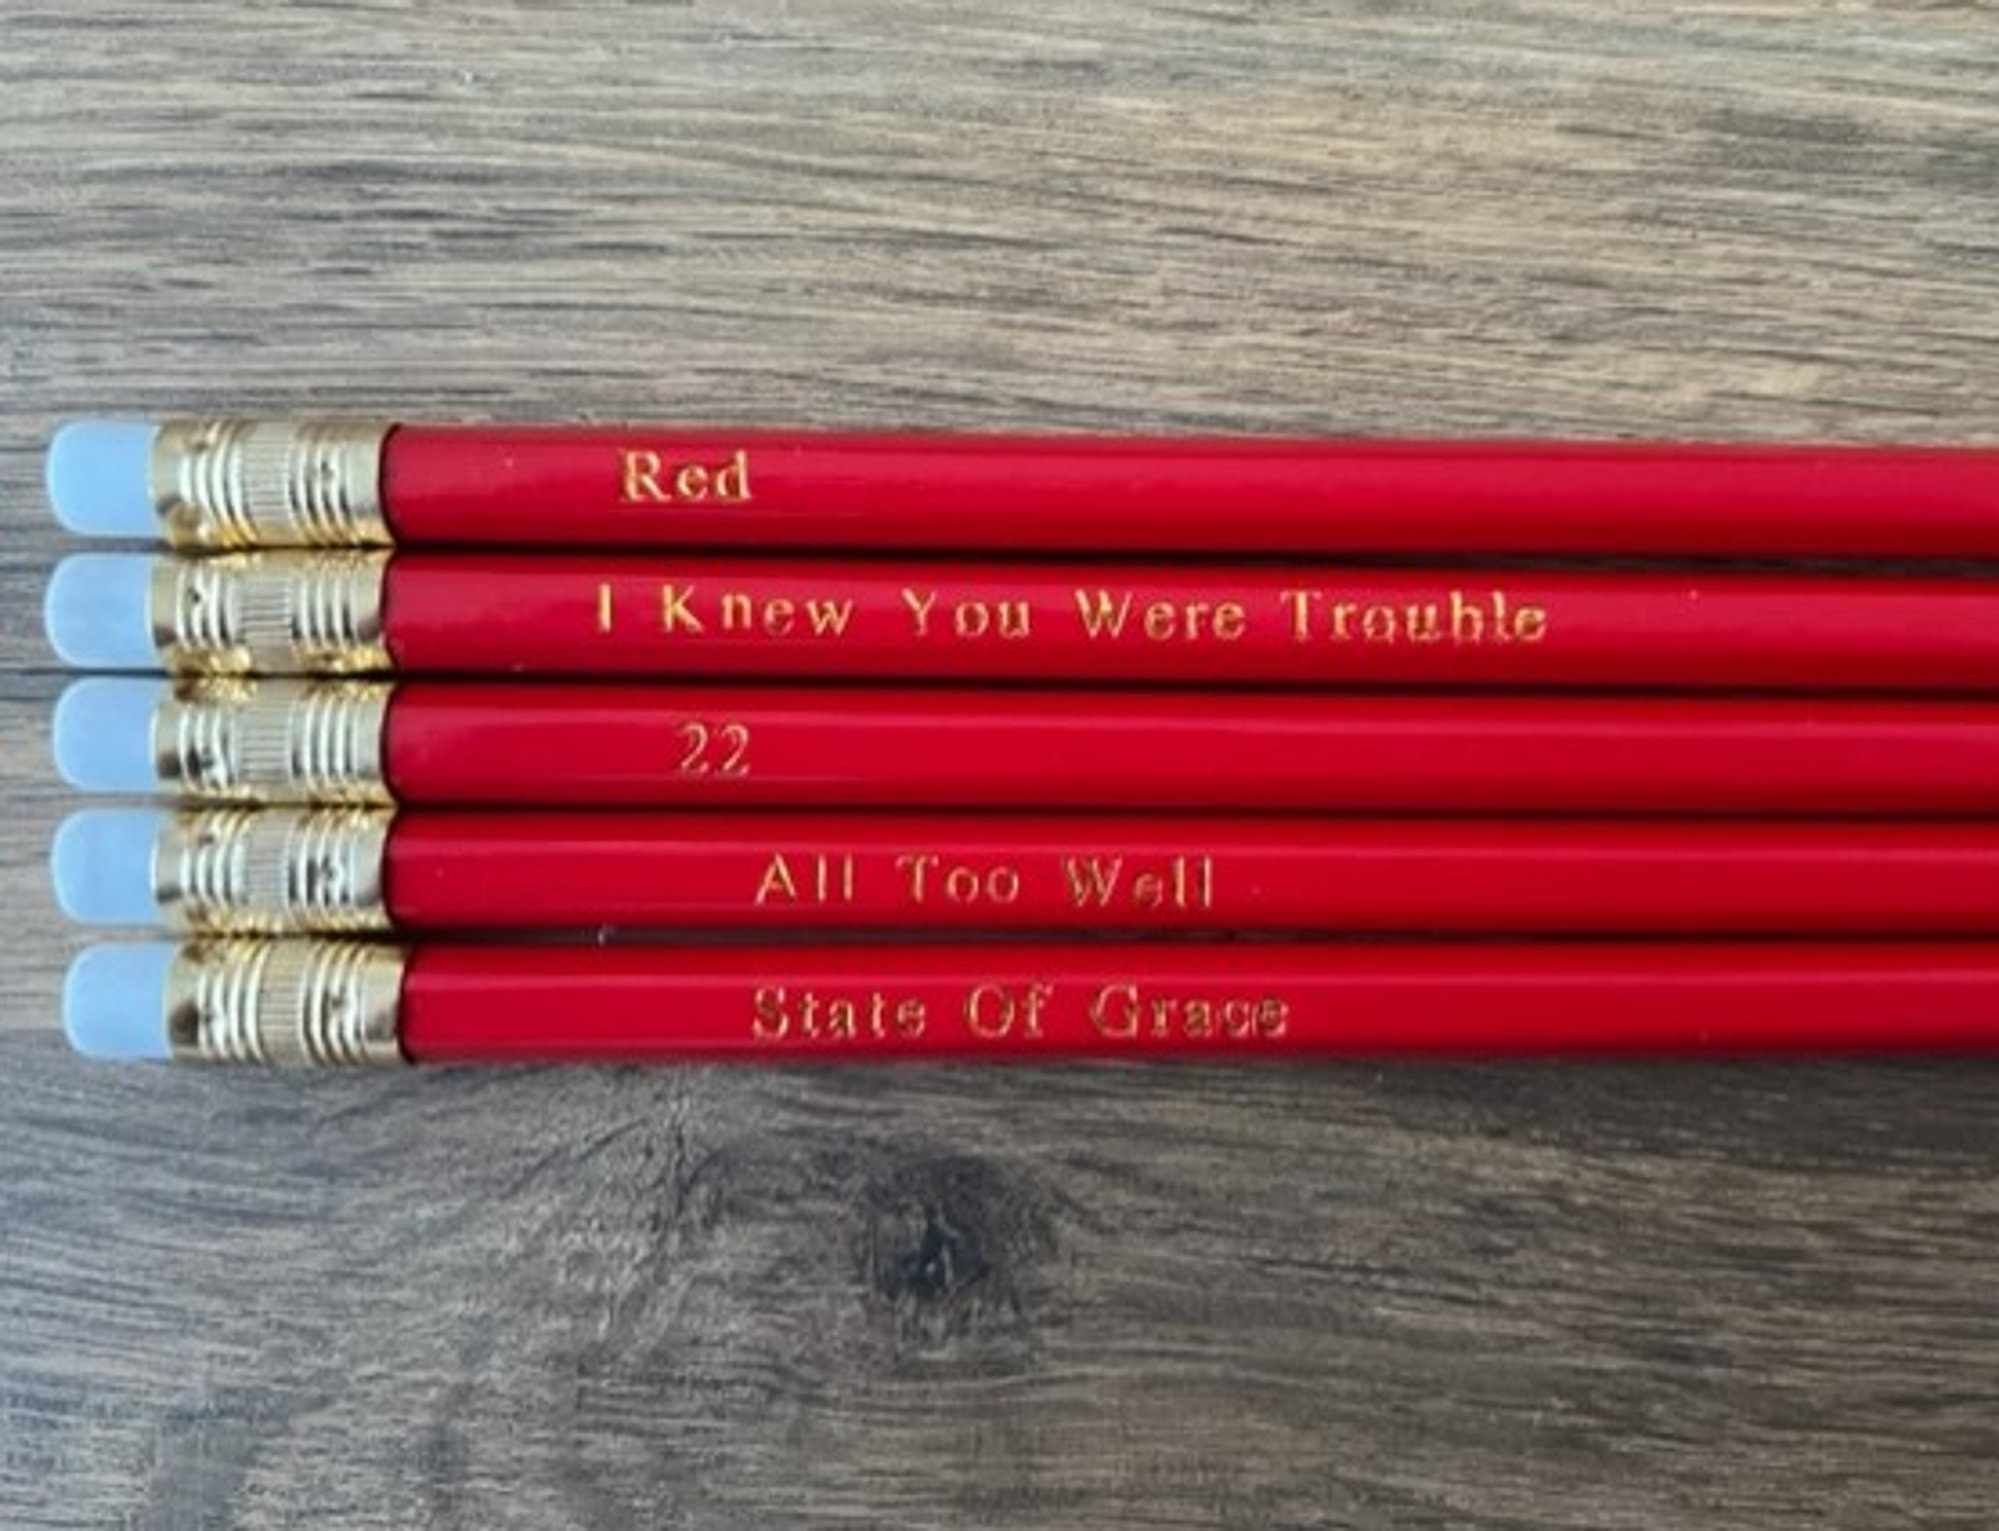 Taylor Swift Pencils - Customised Red Pencils Featuring Red Song Titles